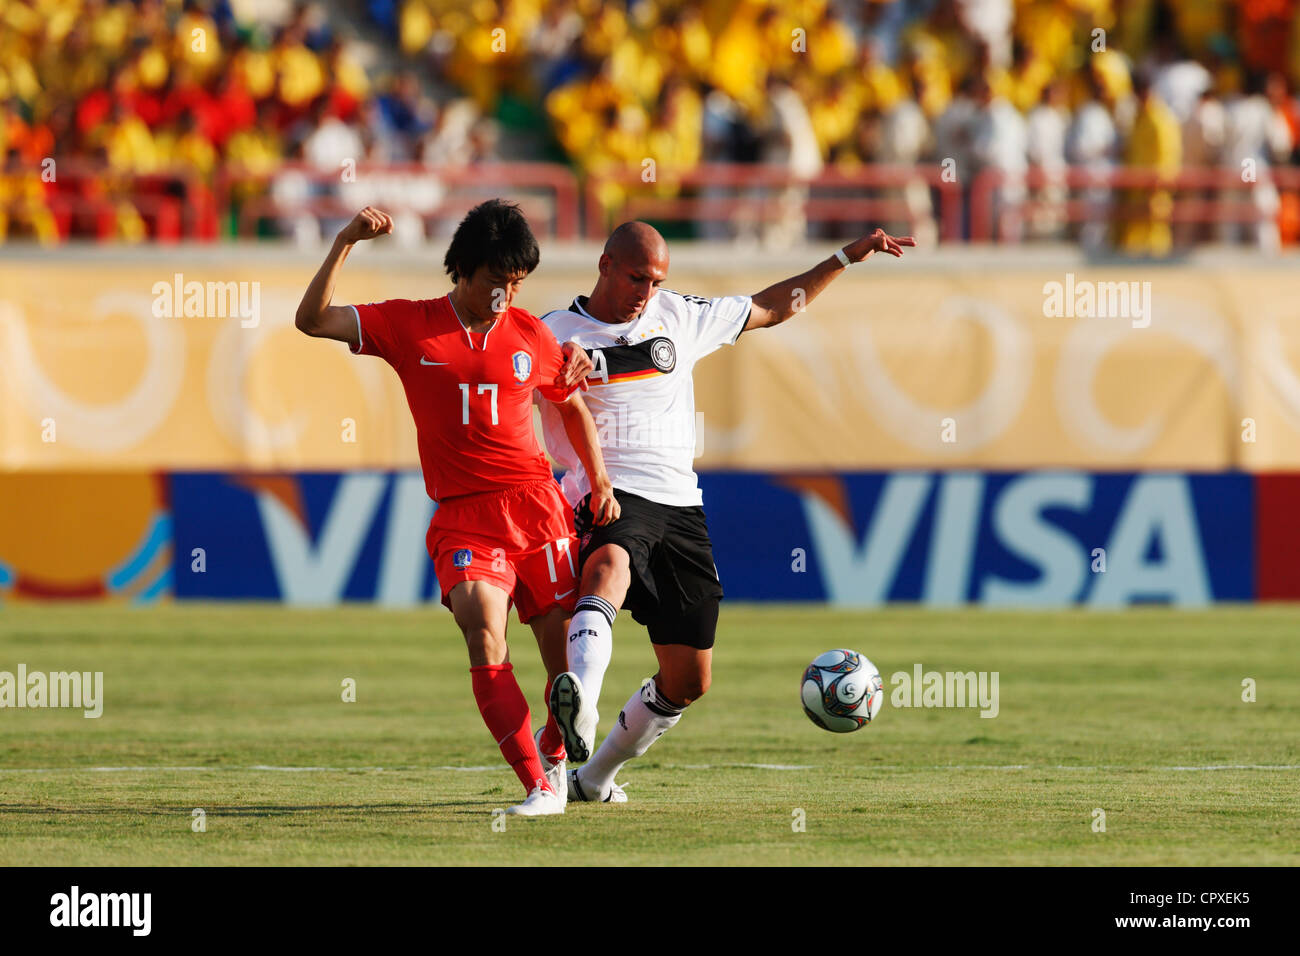 Suk Young Yun of South Korea (L) passes the ball ahead of Dani Schahin of Germany (R) during a FIFA U-20 World Cup match. Stock Photo